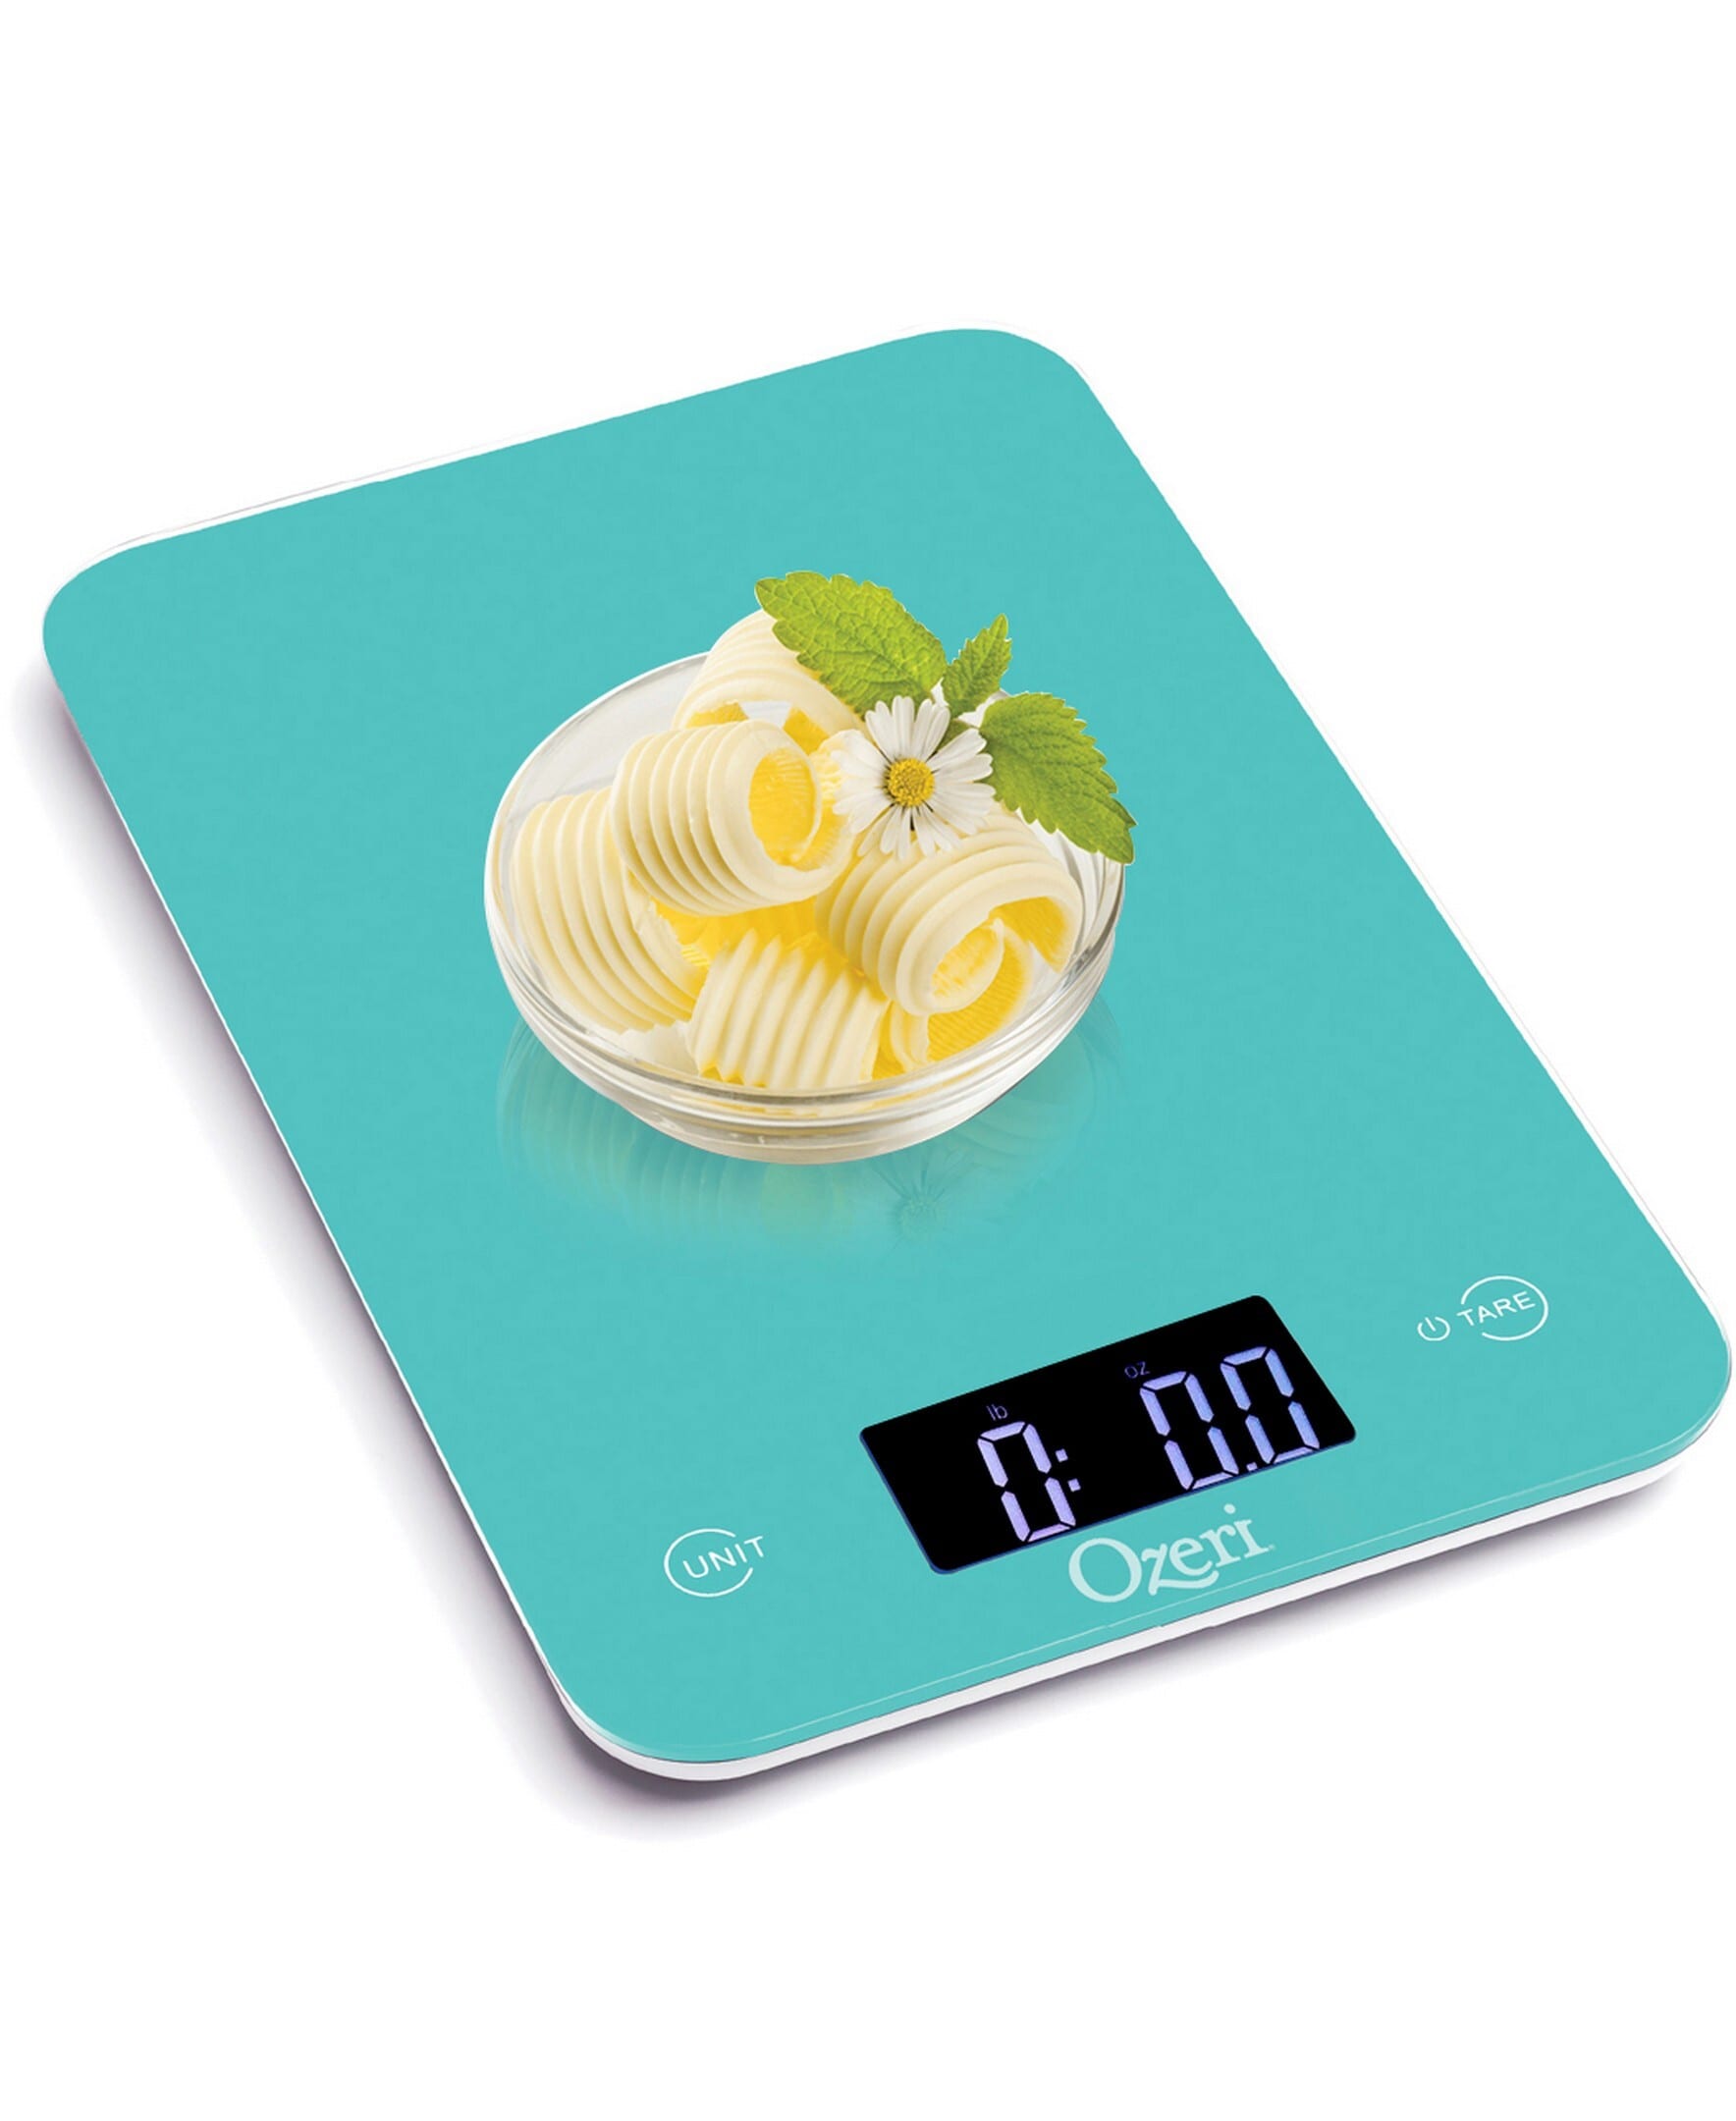 Ozeri Rev Digital Kitchen Scale with Electro-Mechanical Weight Dial